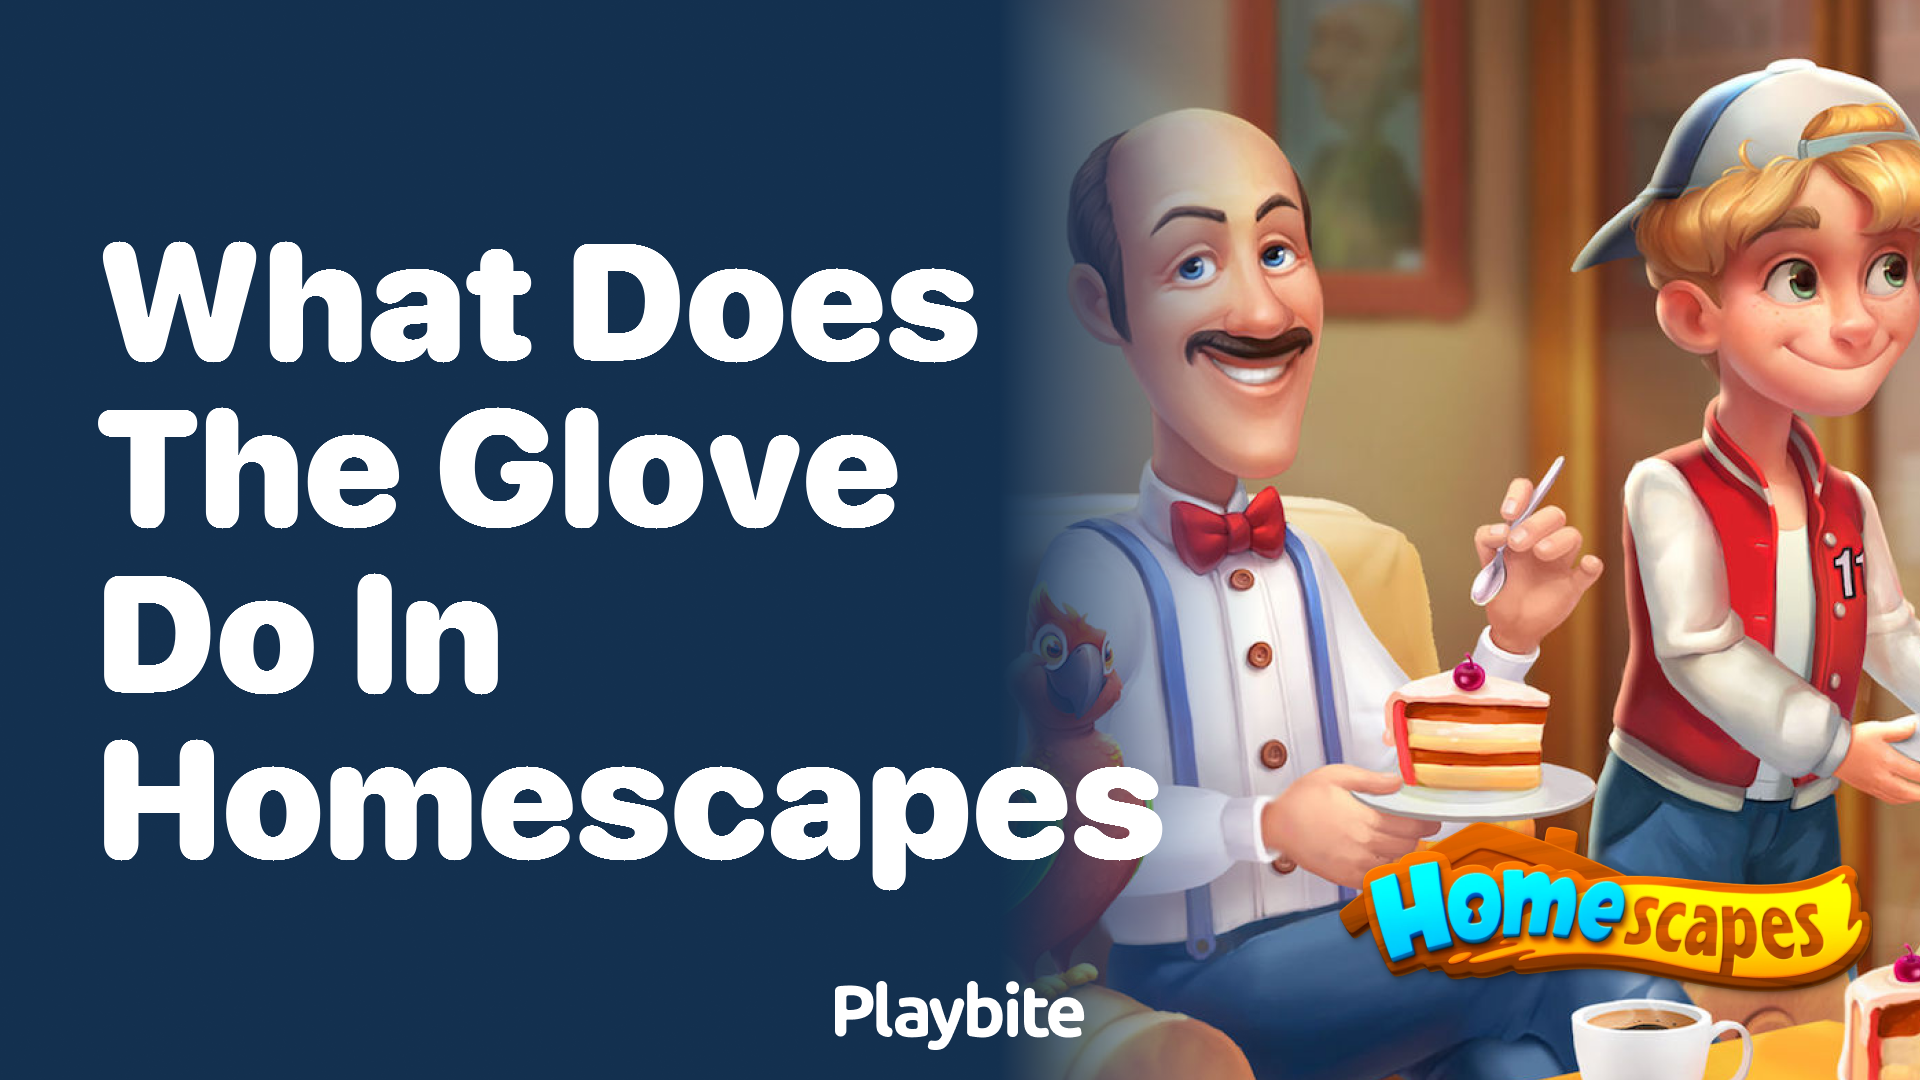 What does the glove do in Homescapes?